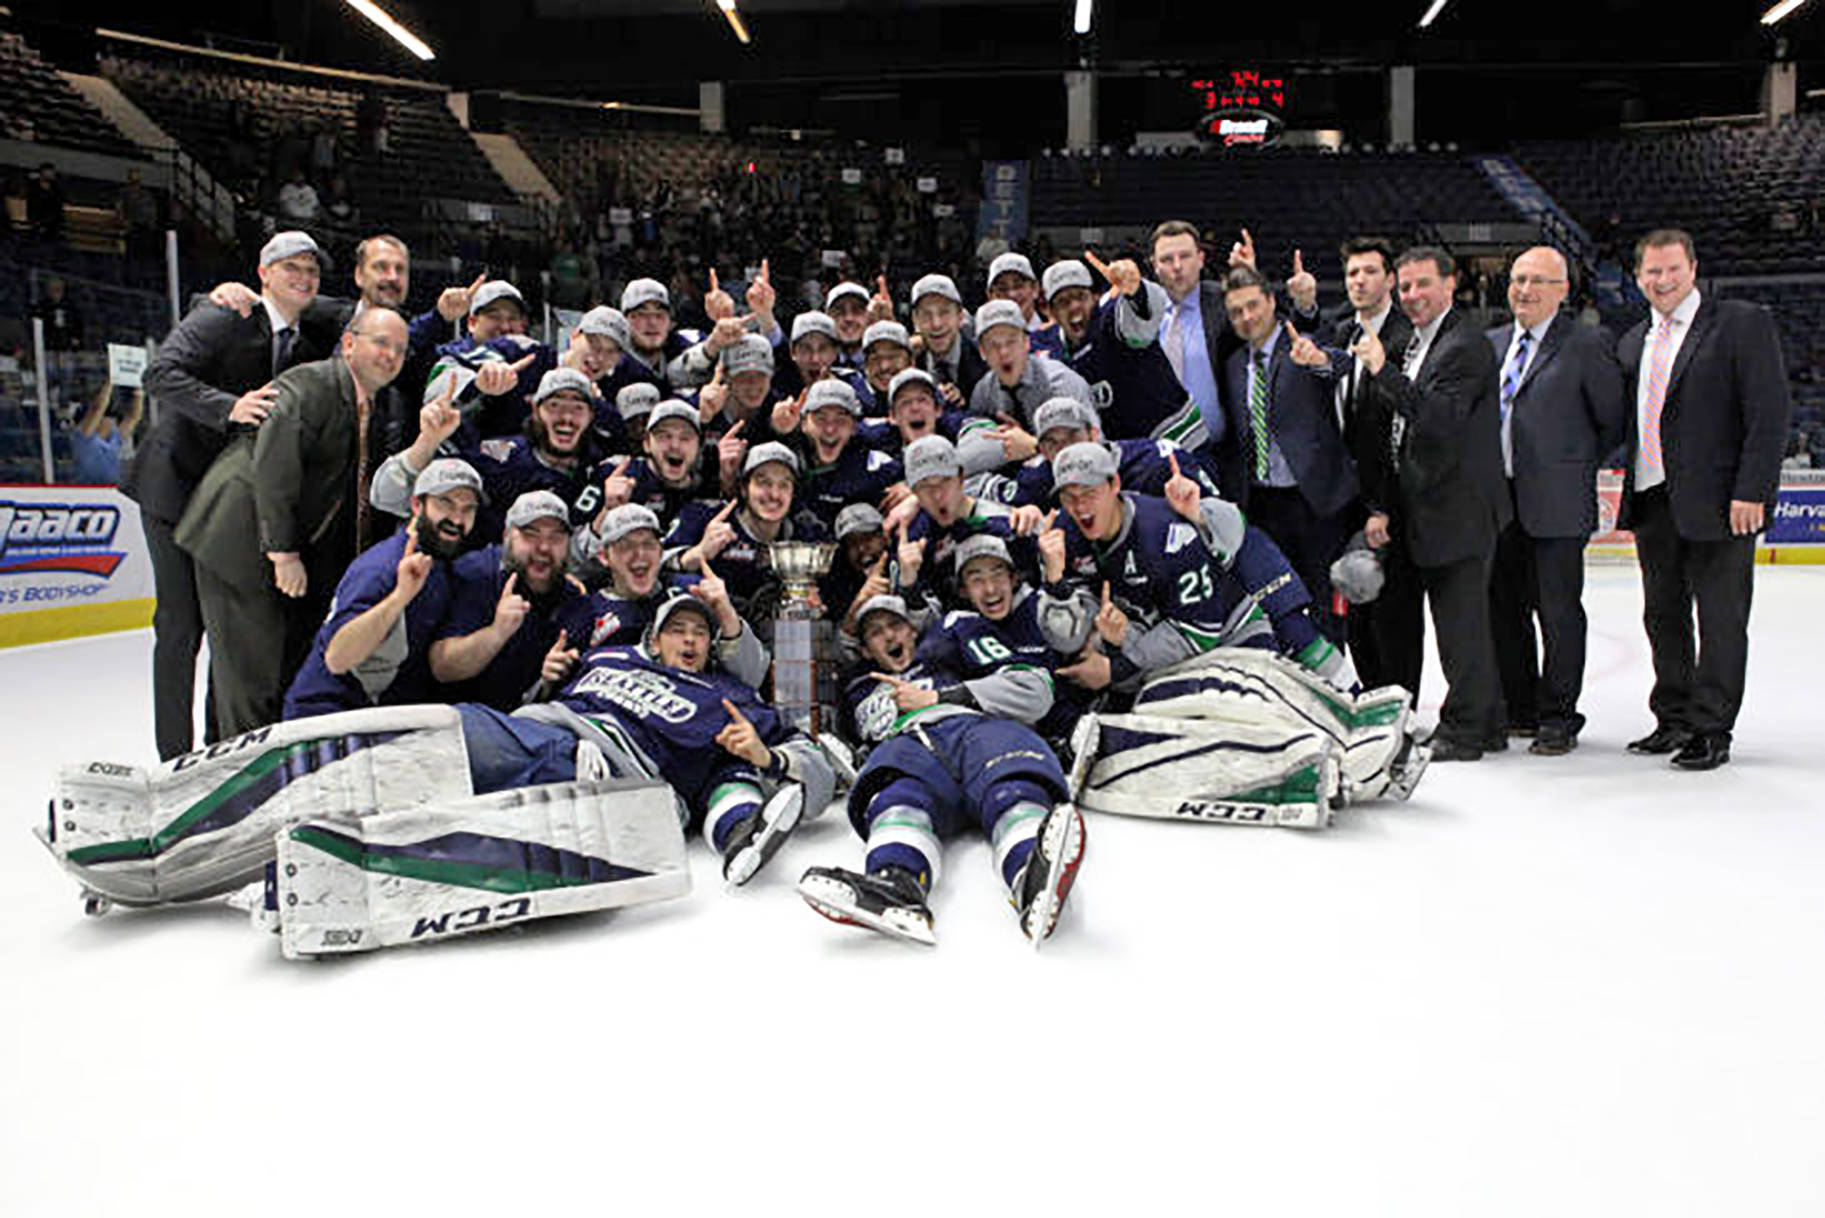 Seattle Thunderbirds celebrate their first Western Hockey League championships with a Game 6 win over the Regina Pats on Sunday night. COURTESY PHOTO, Keith Hershmiller